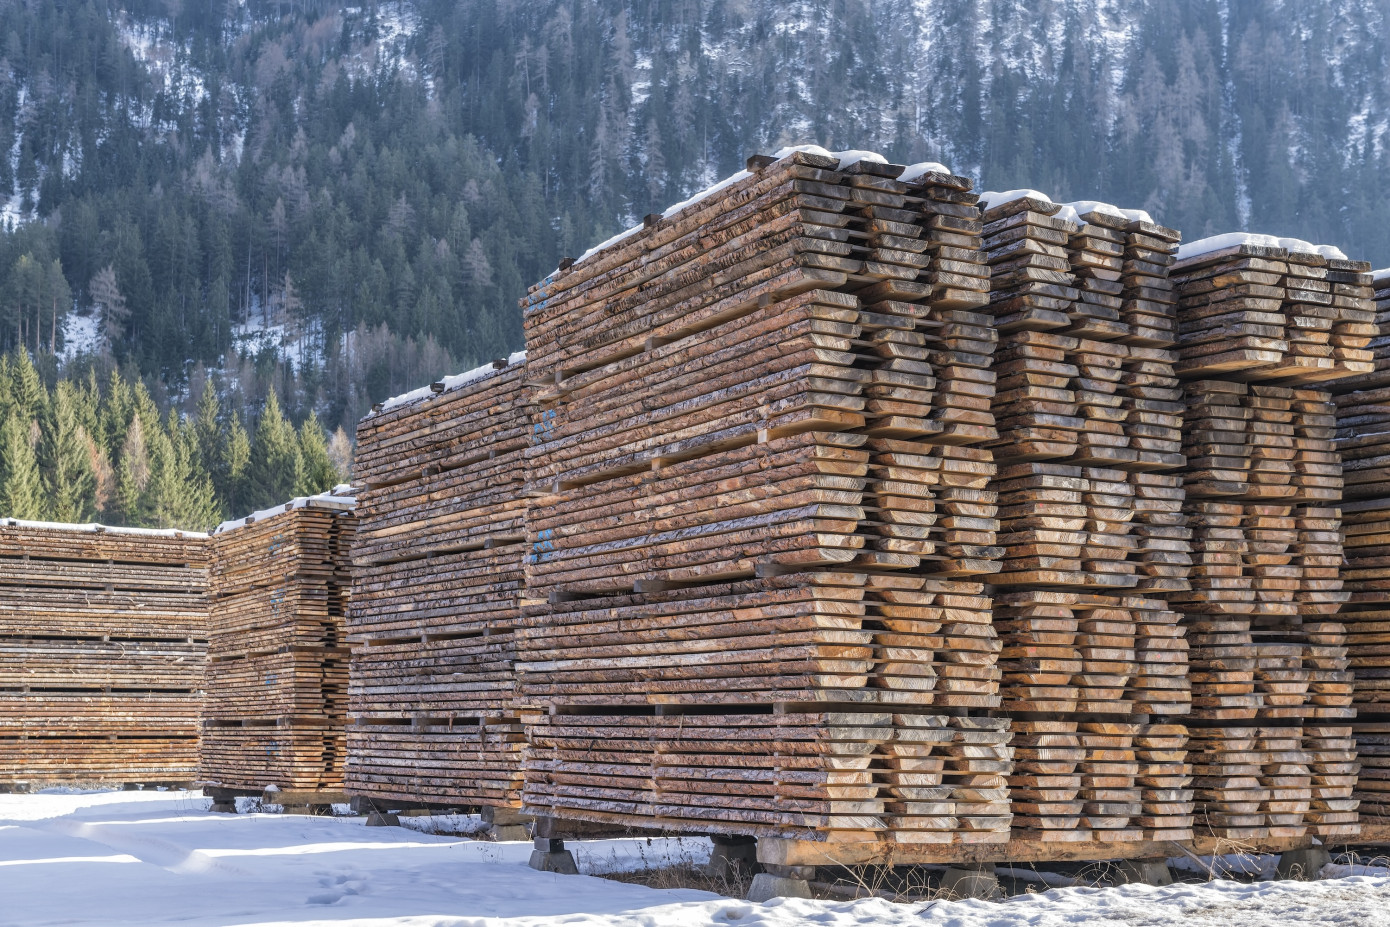 In 2023, Russia decreases lumber production by 4.5%